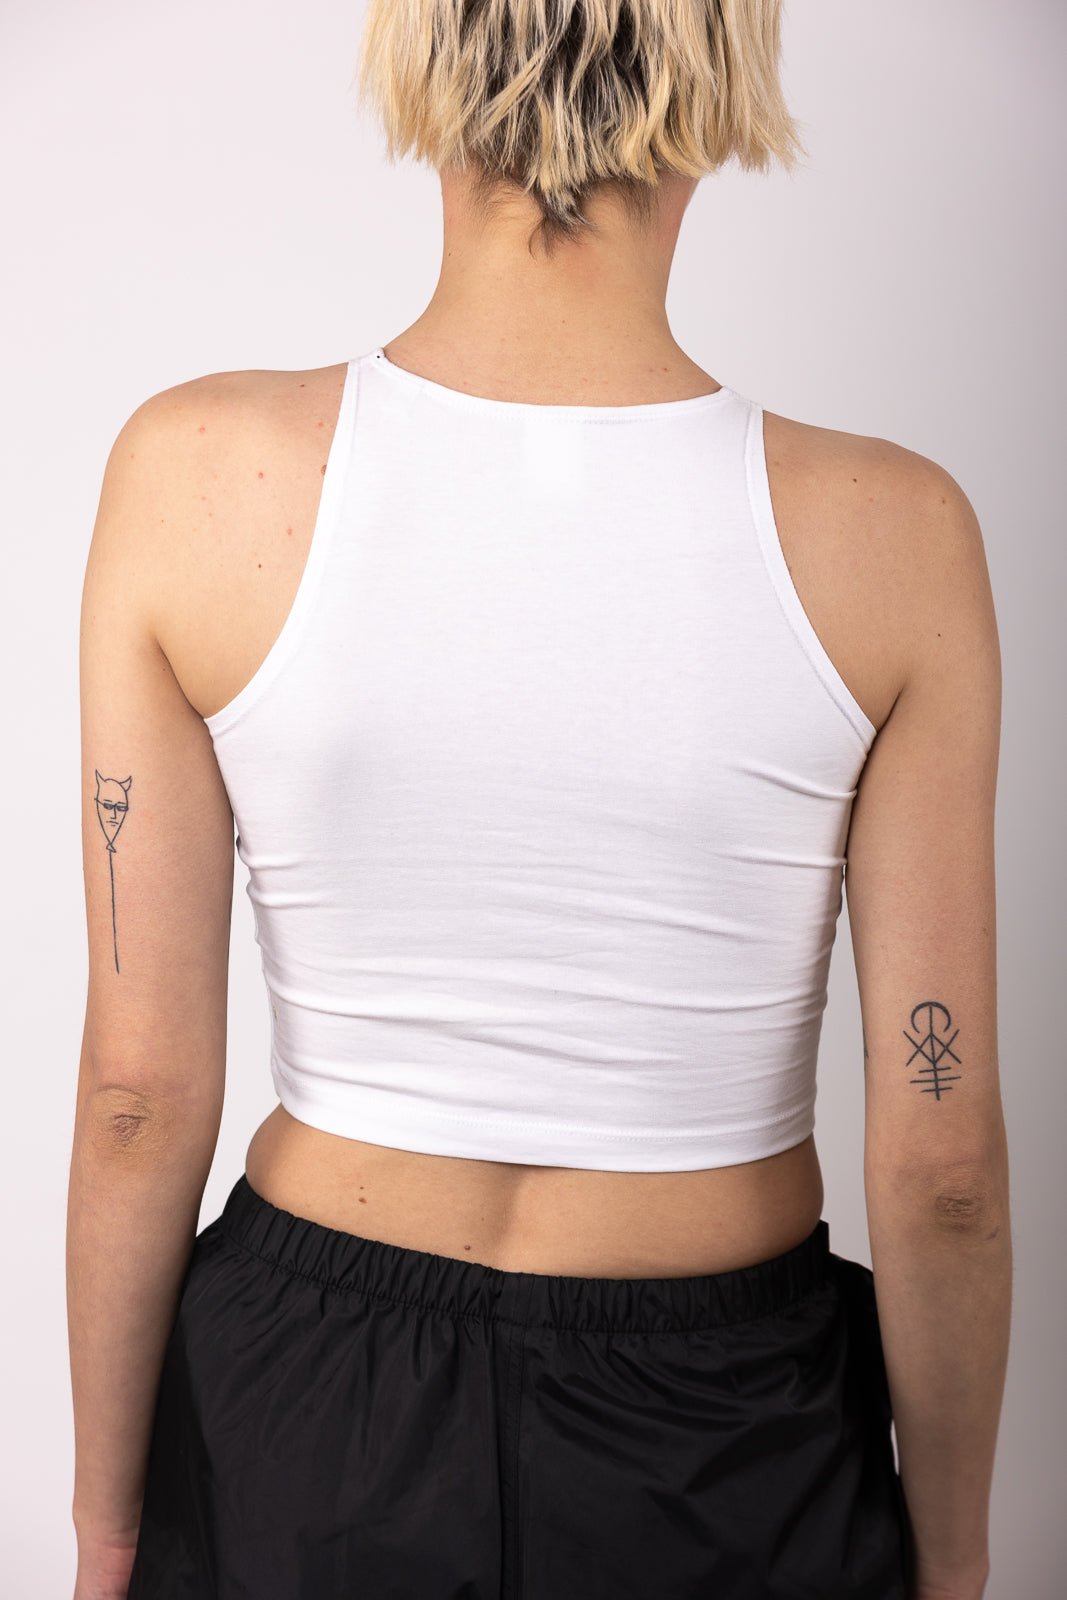 Qravers Shooting Star Cropped Logo Vest White